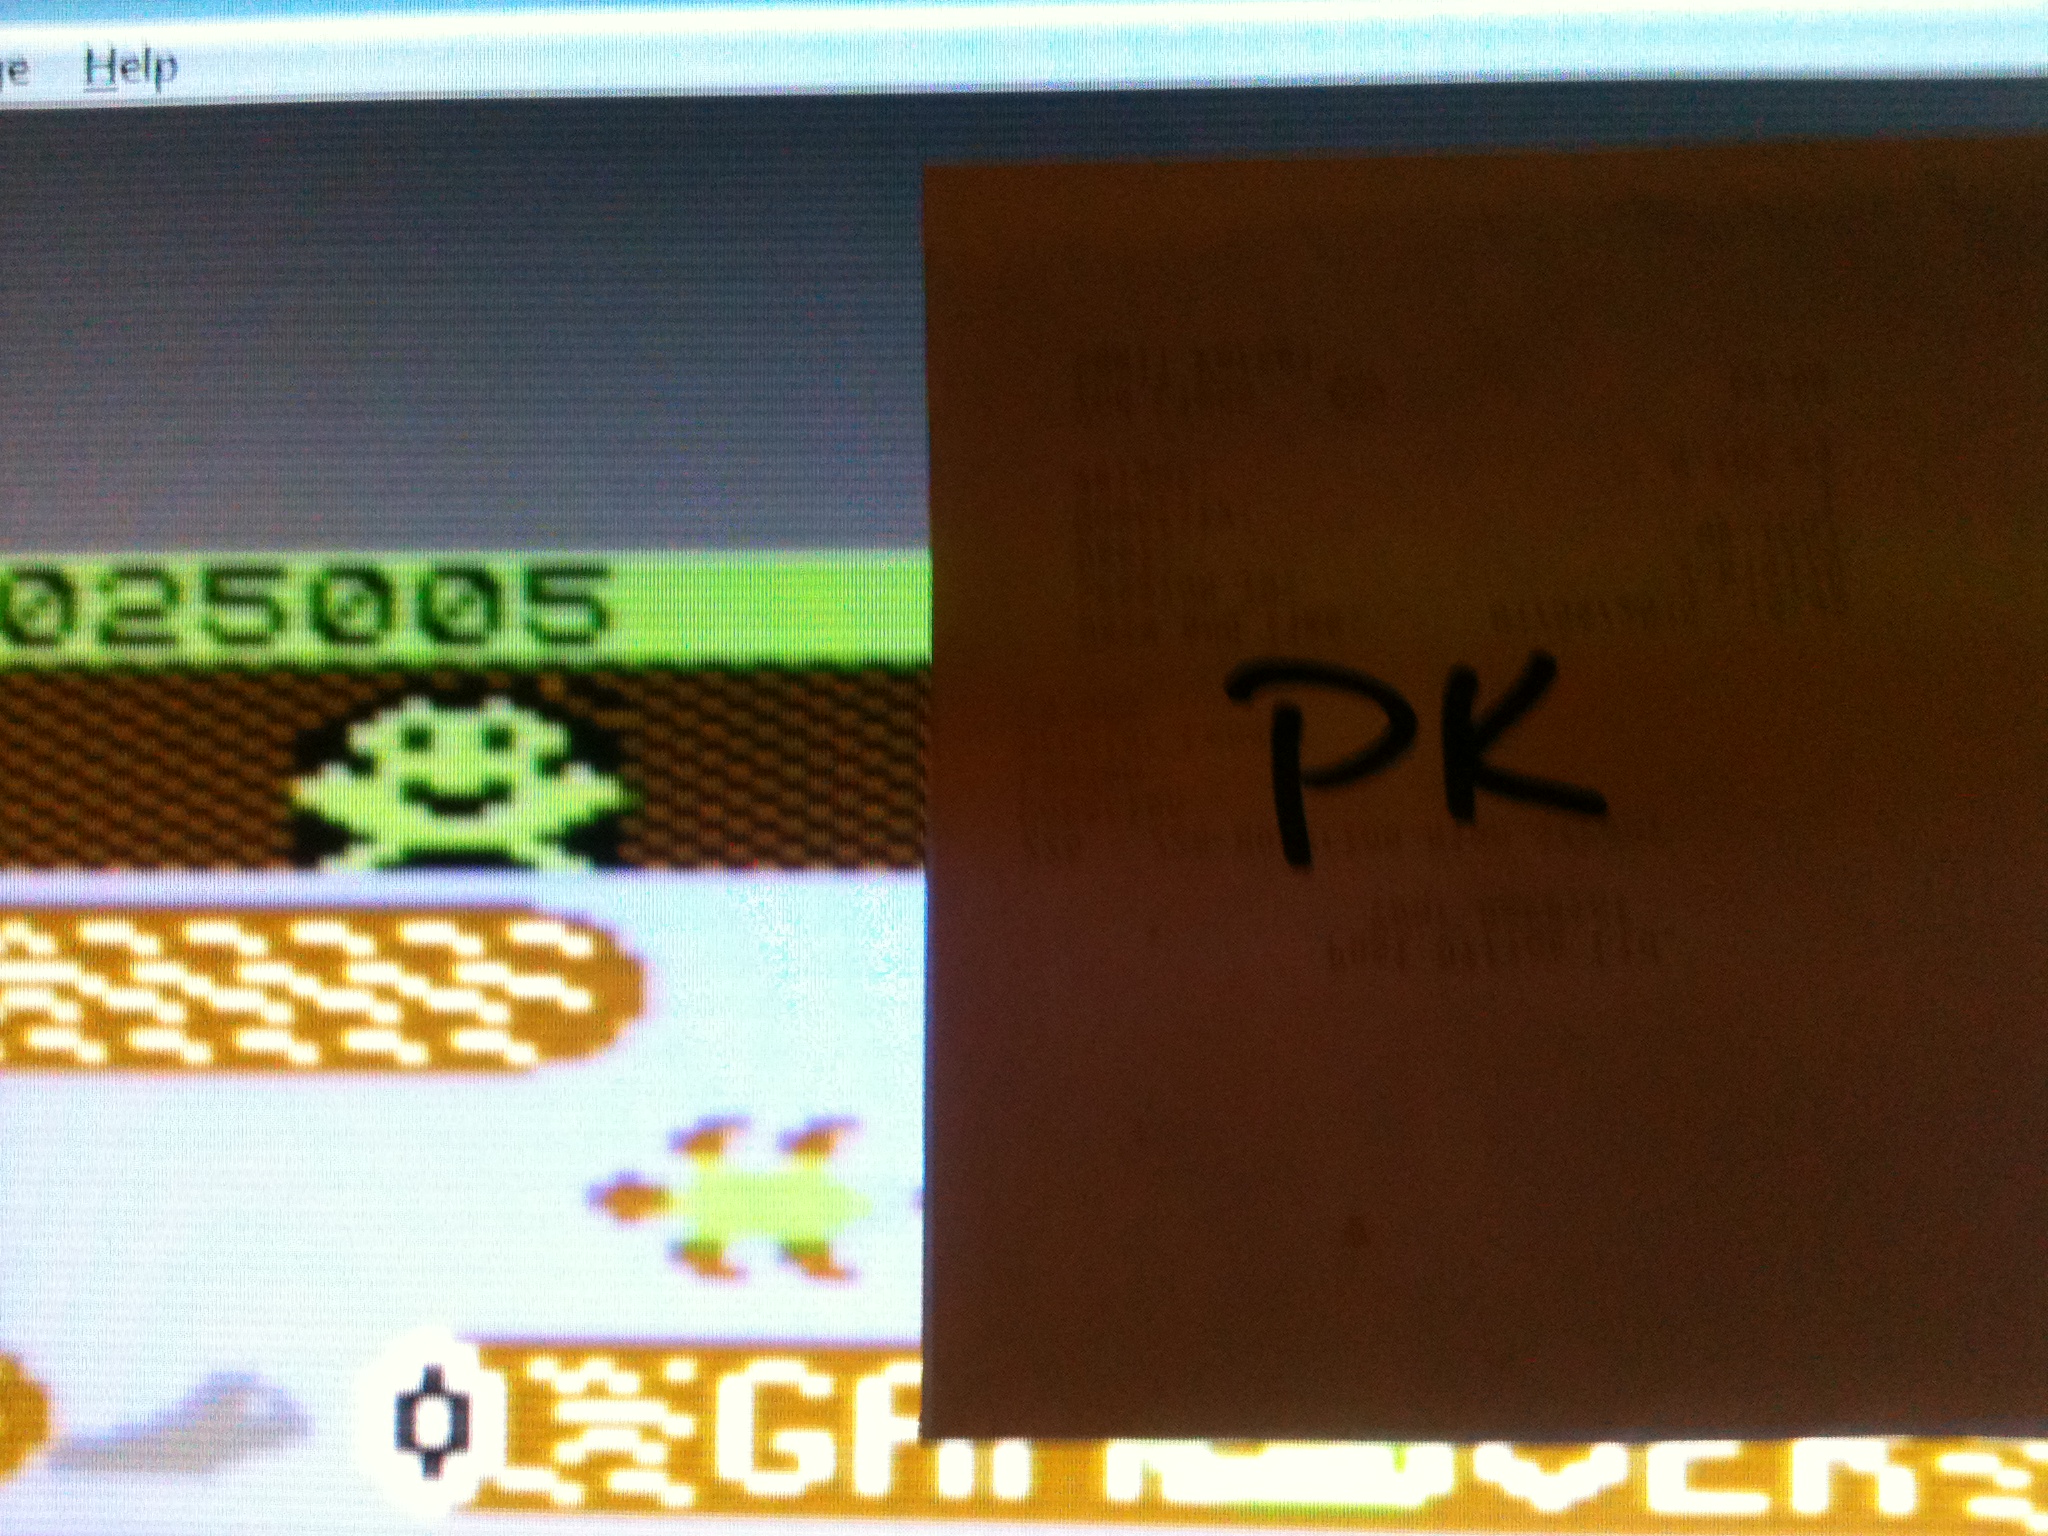 kernzy: Frogger: Sierra [Slow] (Commodore 64 Emulated) 25,005 points on 2015-09-21 17:30:00